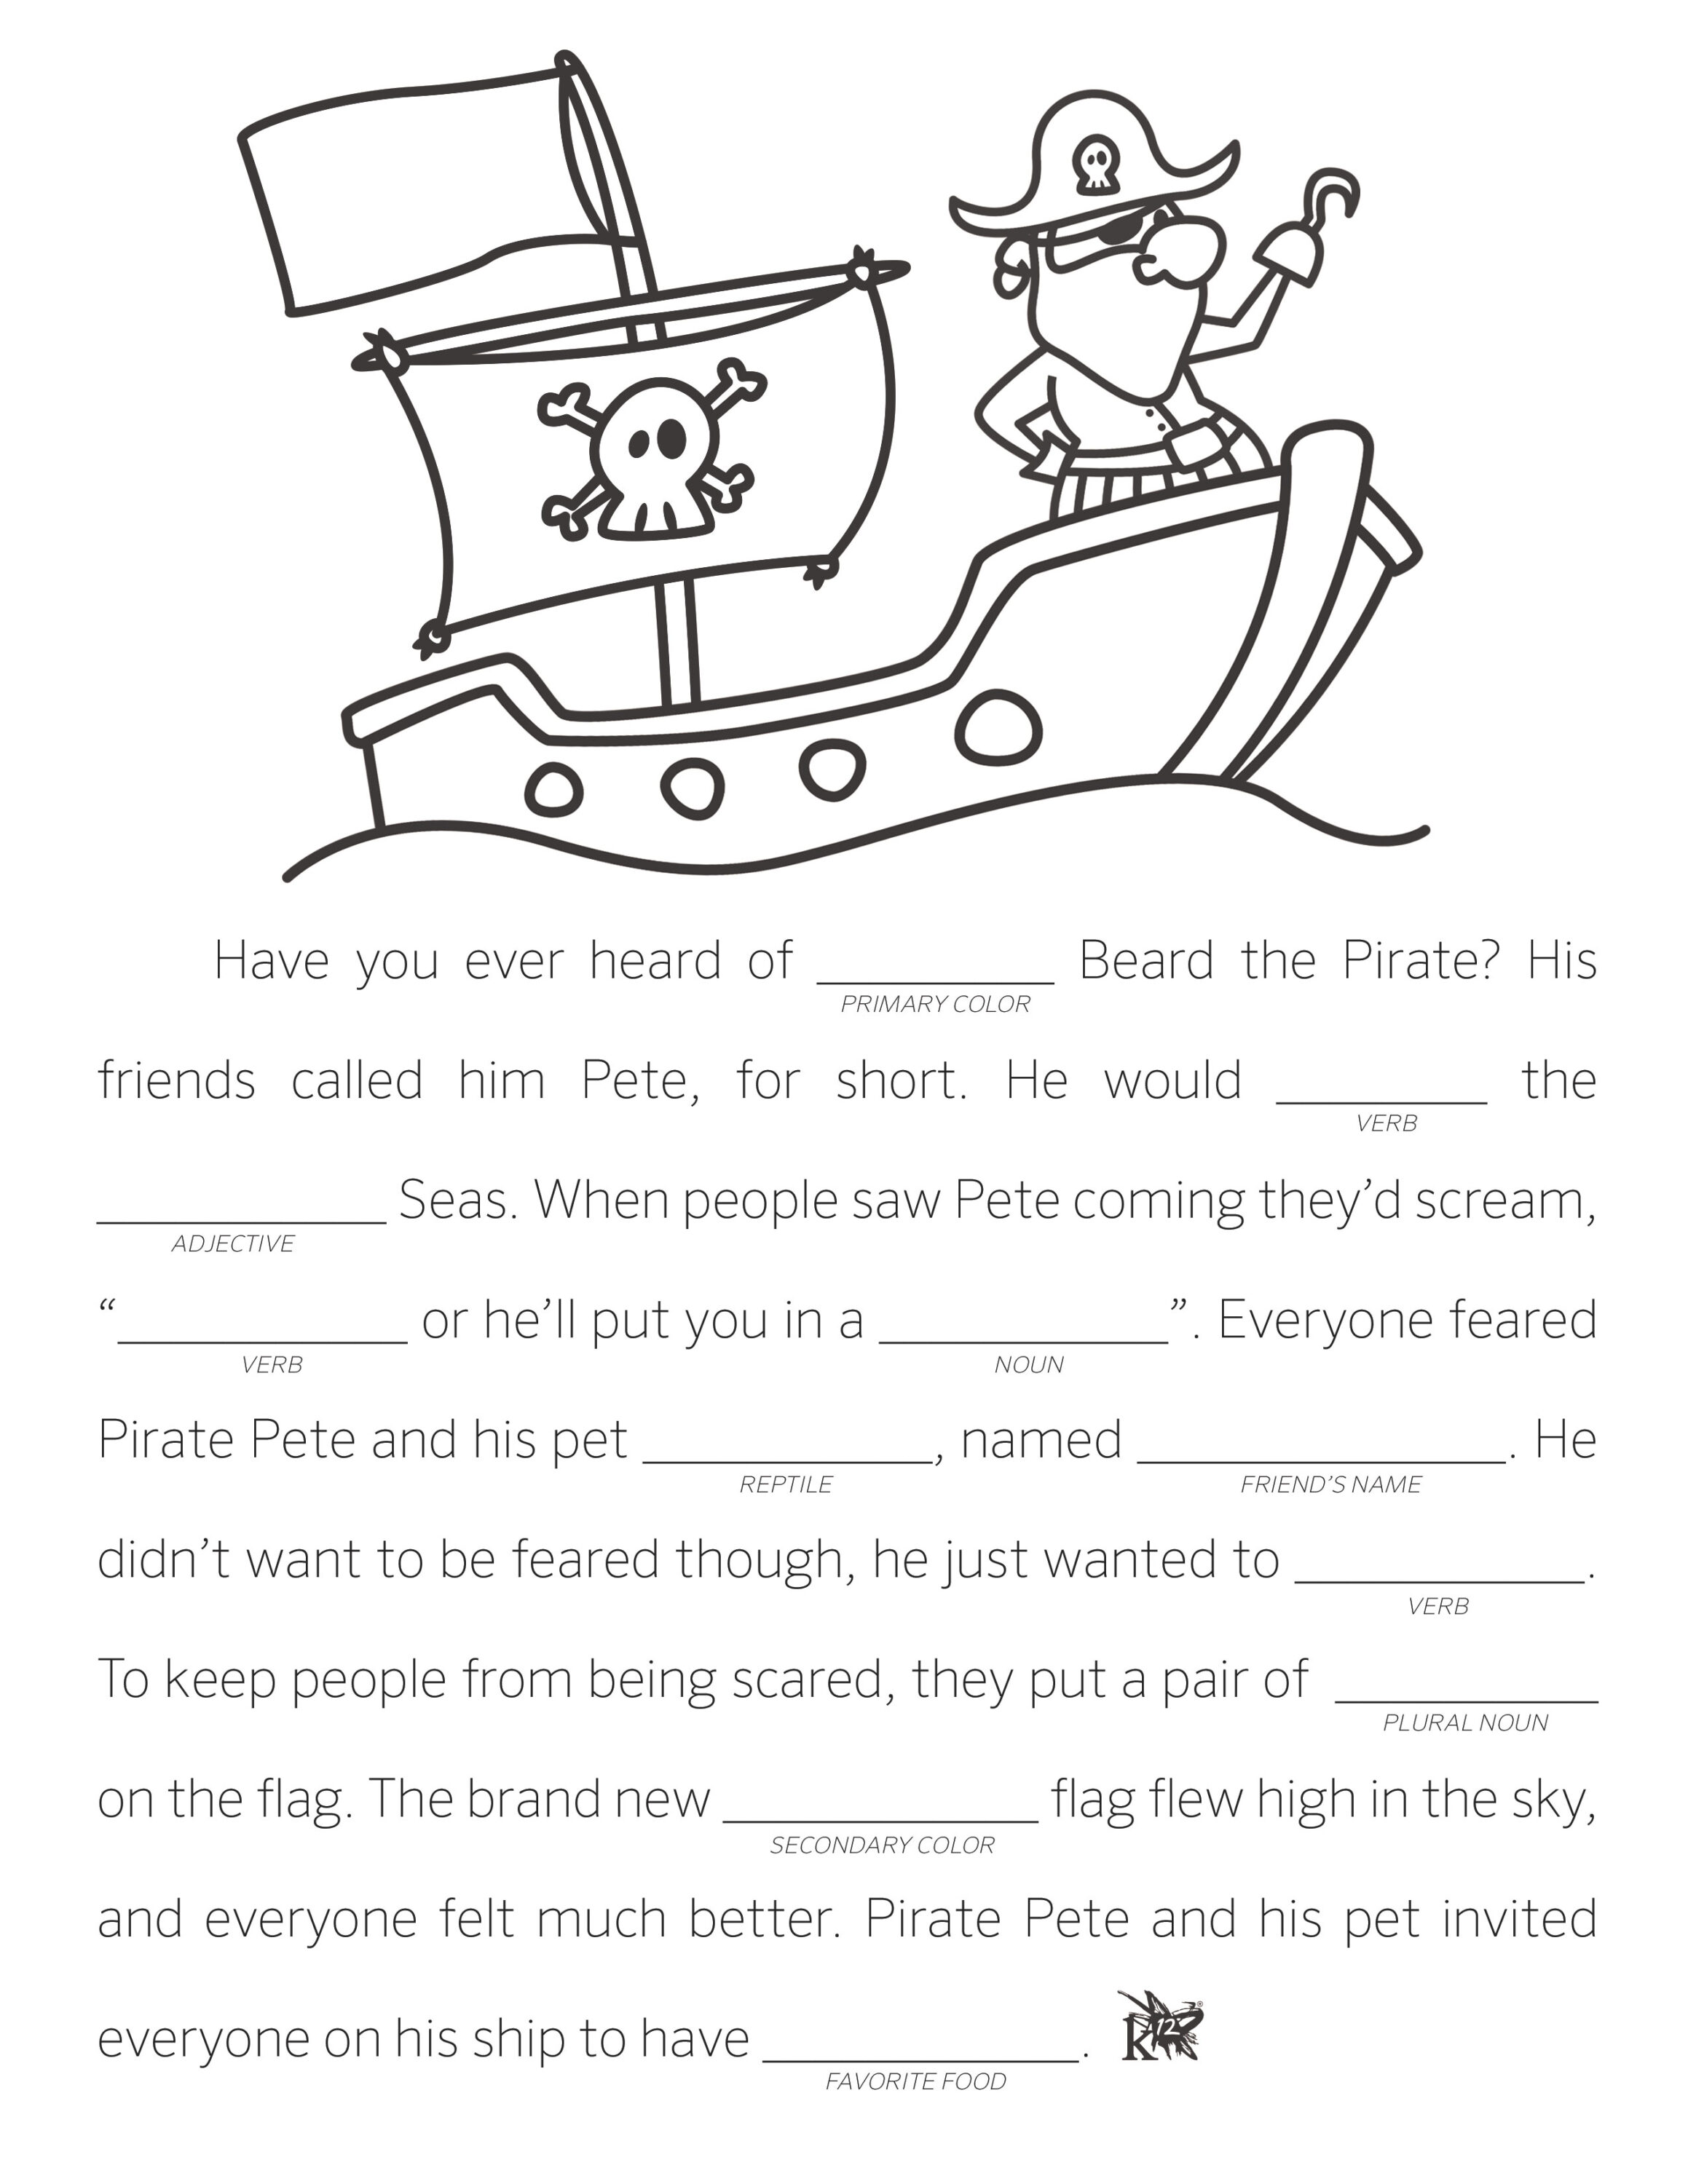 create-a-story-fill-in-the-blanks-printable-form-templates-and-letter